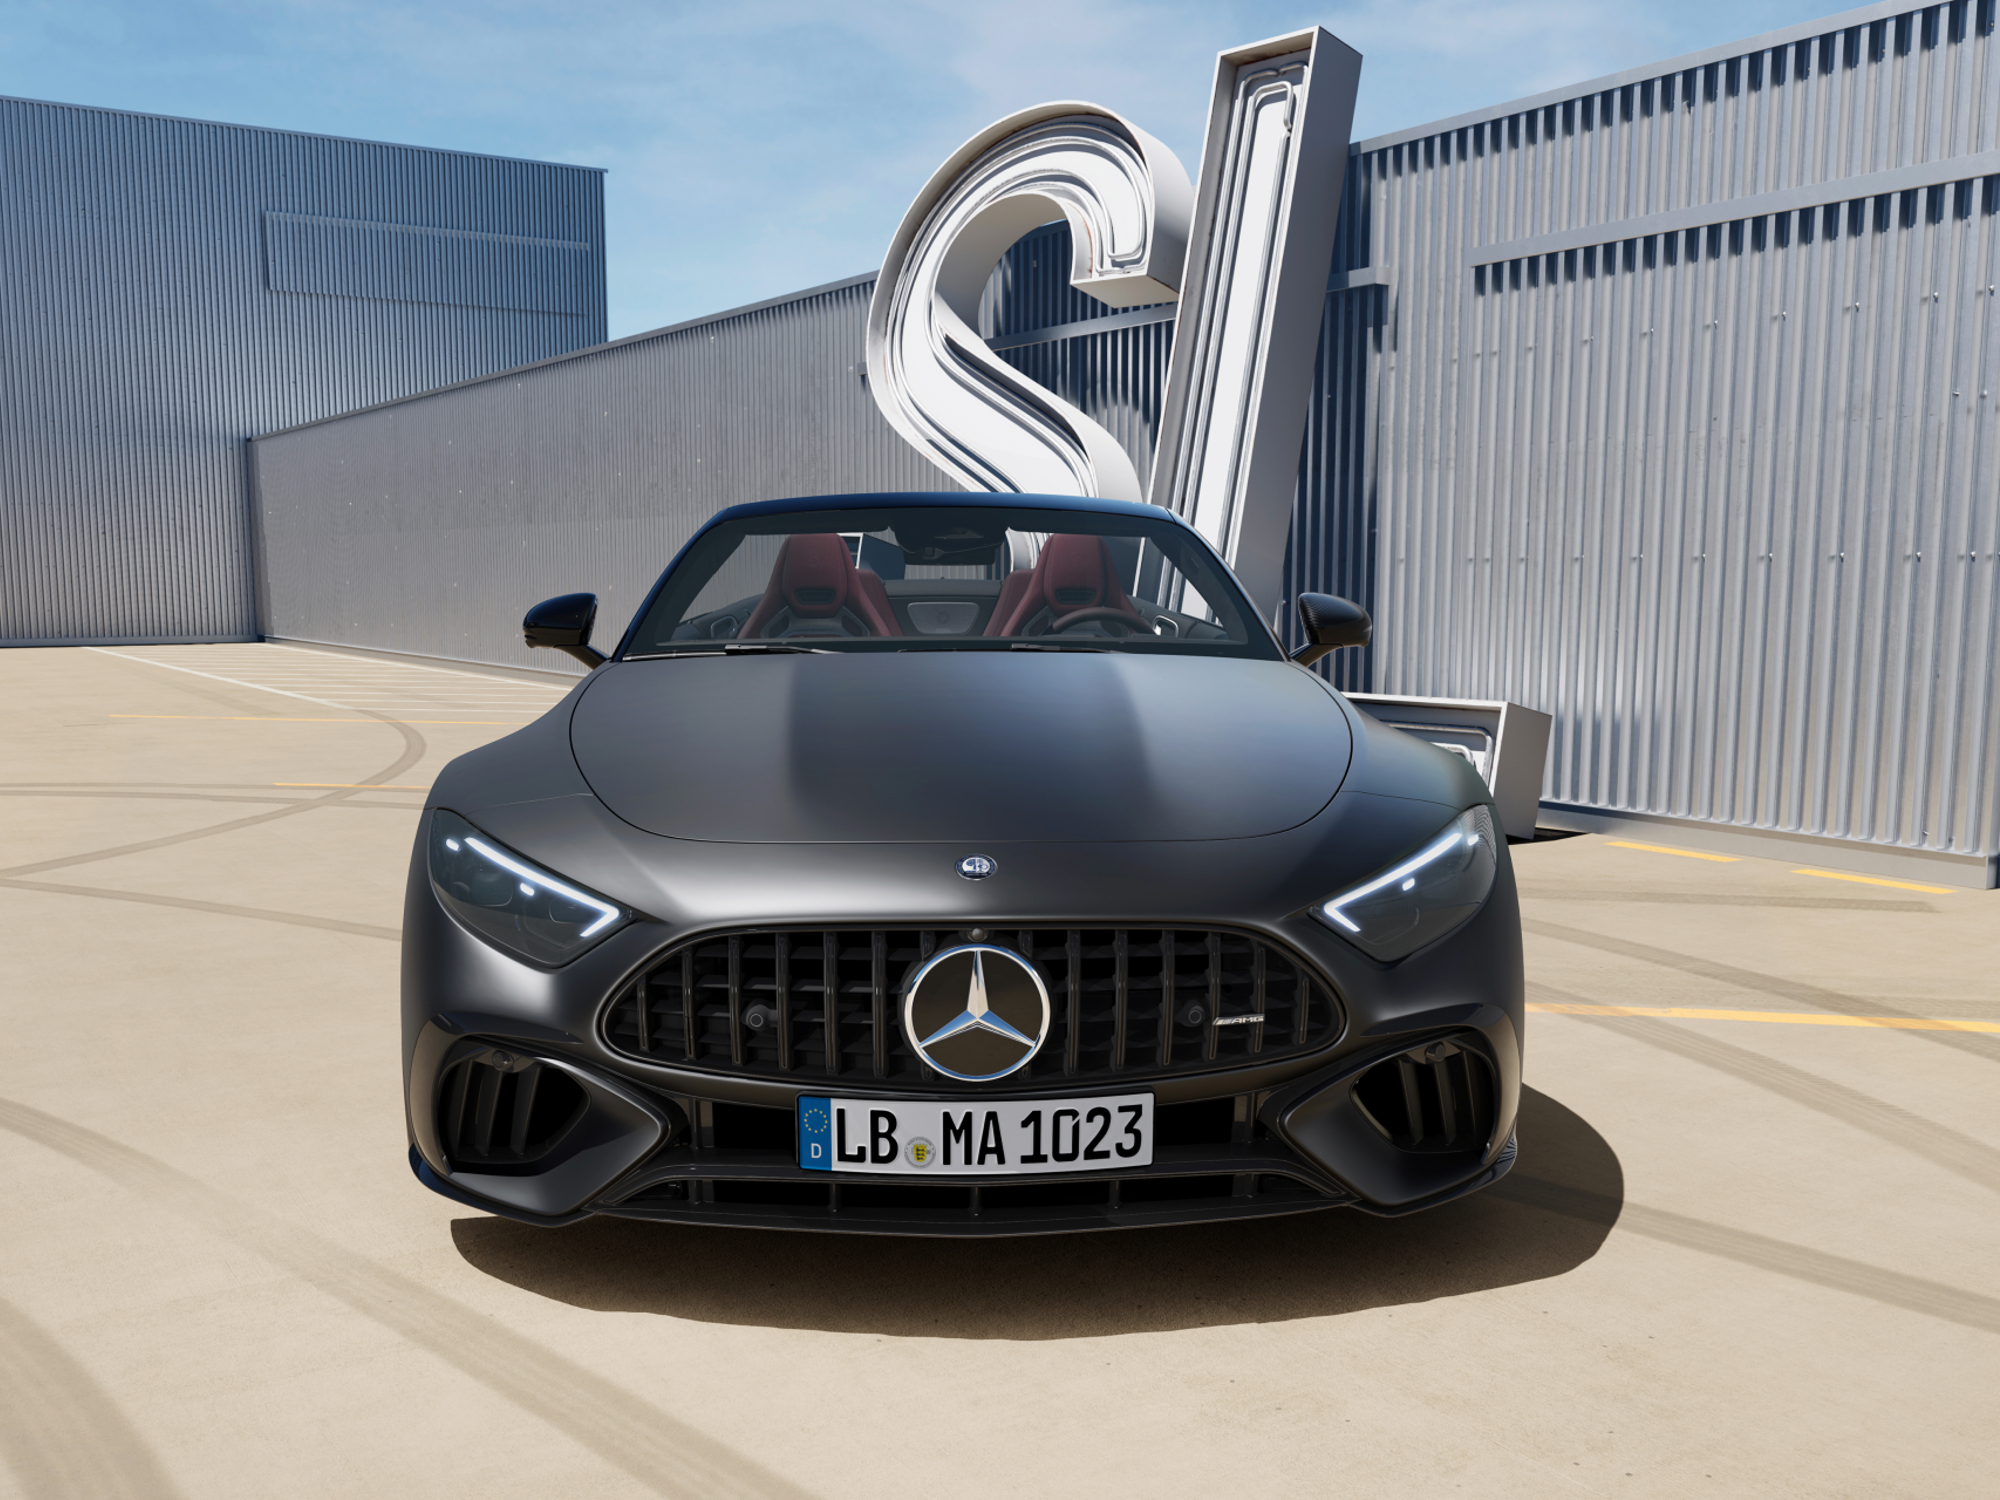 2024 Mercedes-AMG SL 63 S E PERFORMANCE gray paint direct front on view.